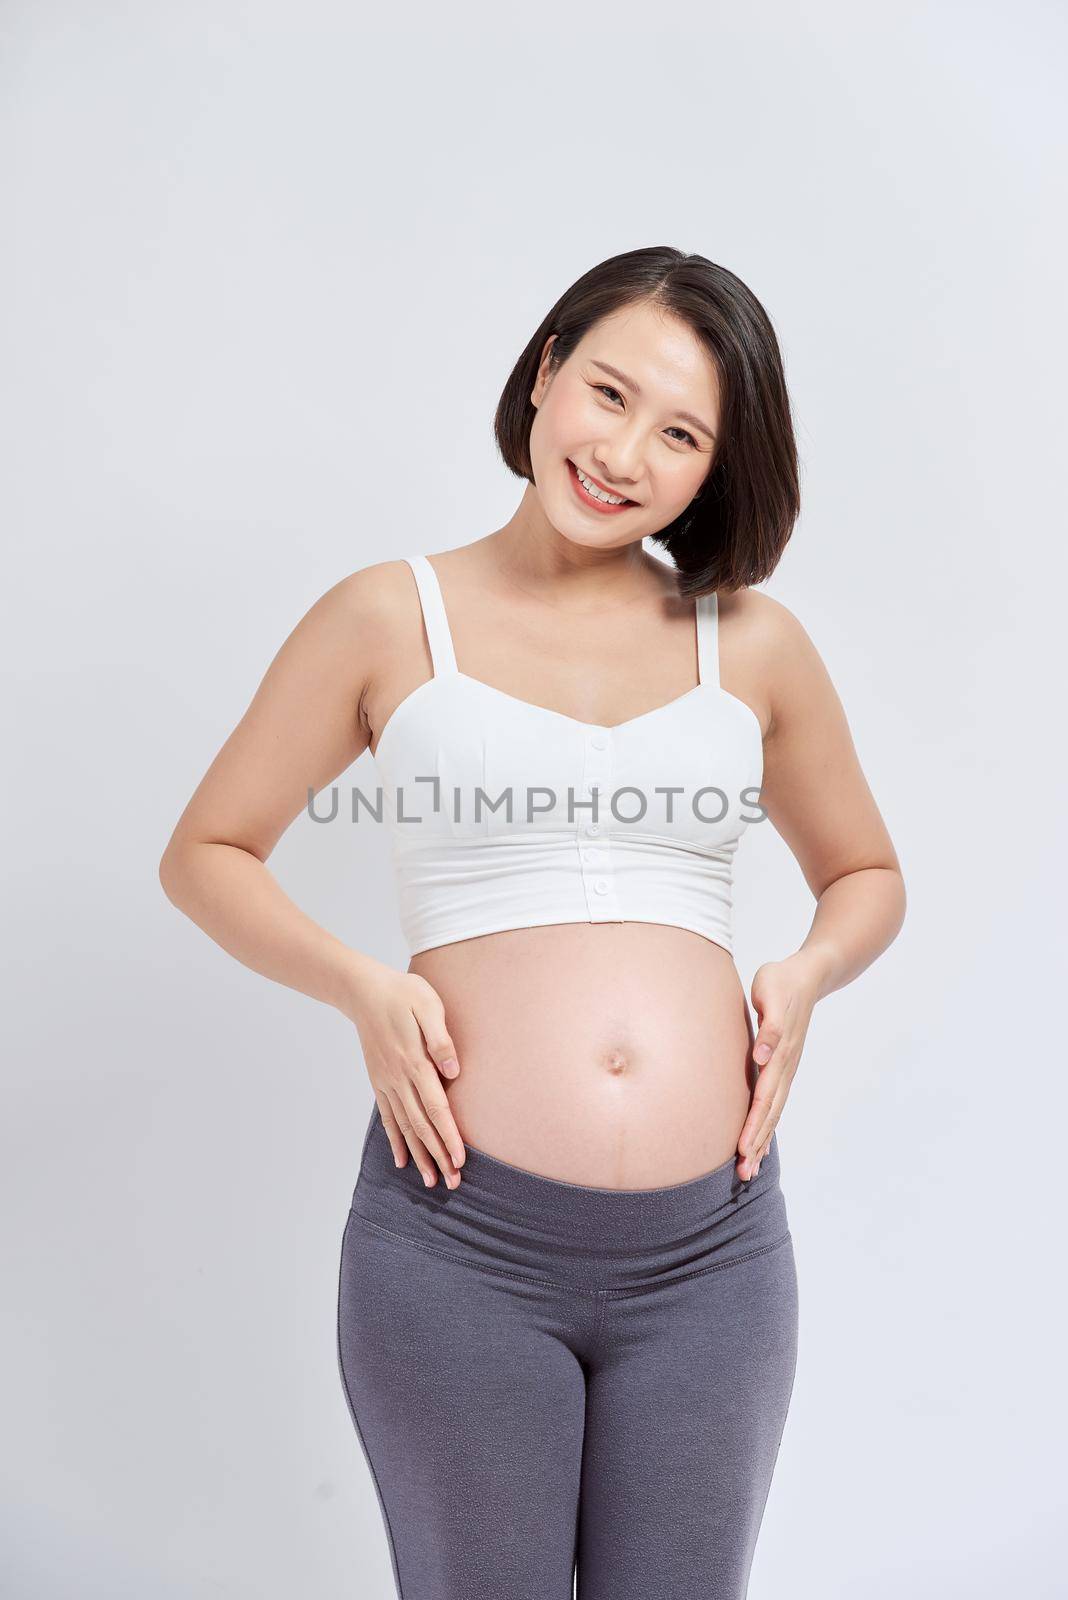 Pregnant women are watching the stomach grow happily. by makidotvn